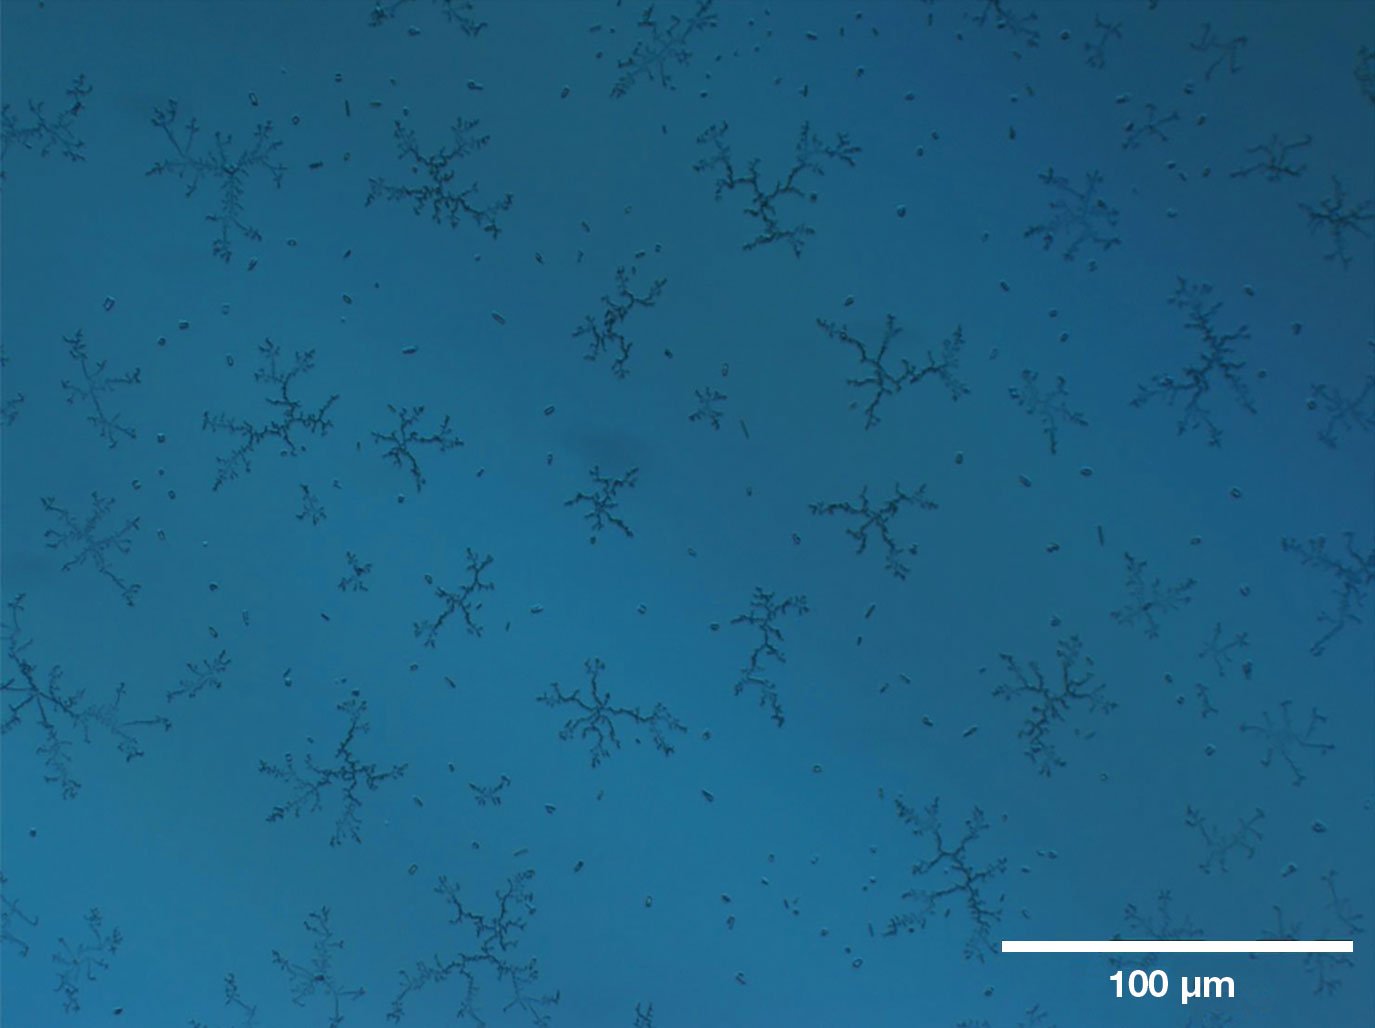 Figure 1. Example of UV laser-induced contamination (LIC) on an uncoated fused silica window after six weeks of ~3-W UV laser illumination. Taken with a microscope using a 10× objective, the image’s field of view corresponds to ~610 × 460 µm. See Reference 1. Courtesy of Edmund Optics.